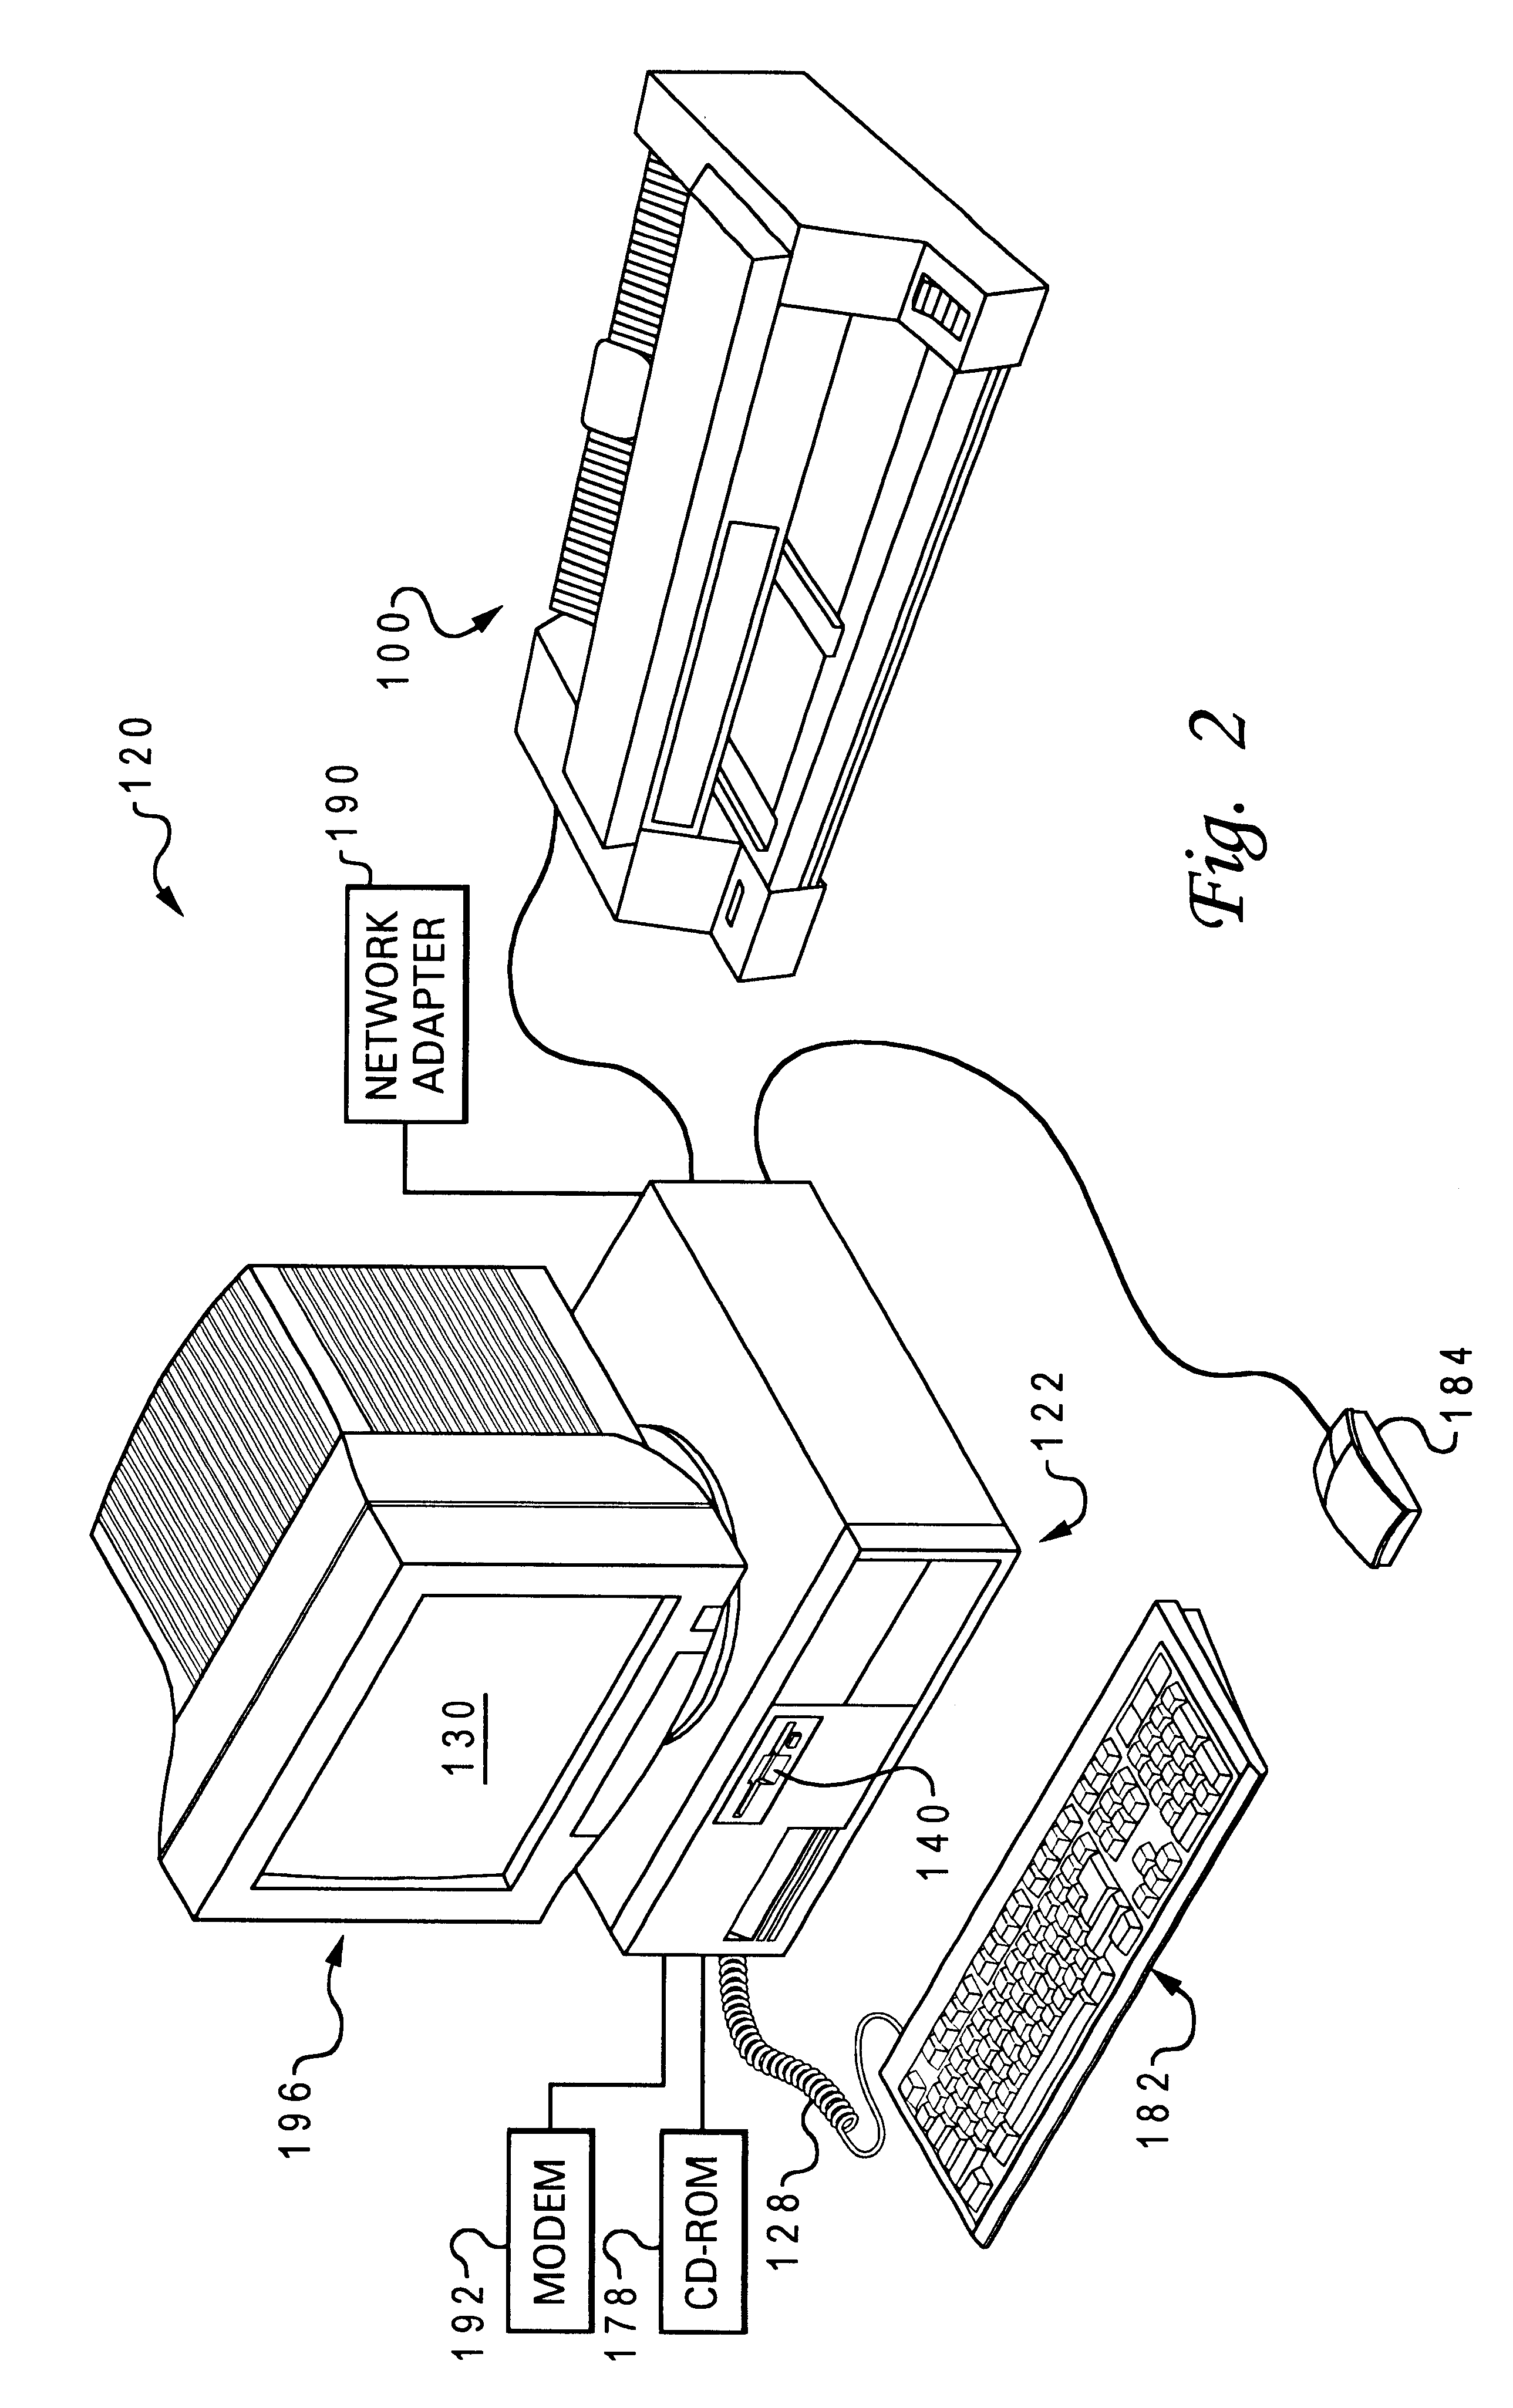 Method and system for managing speculative requests in a multi-level memory hierarchy